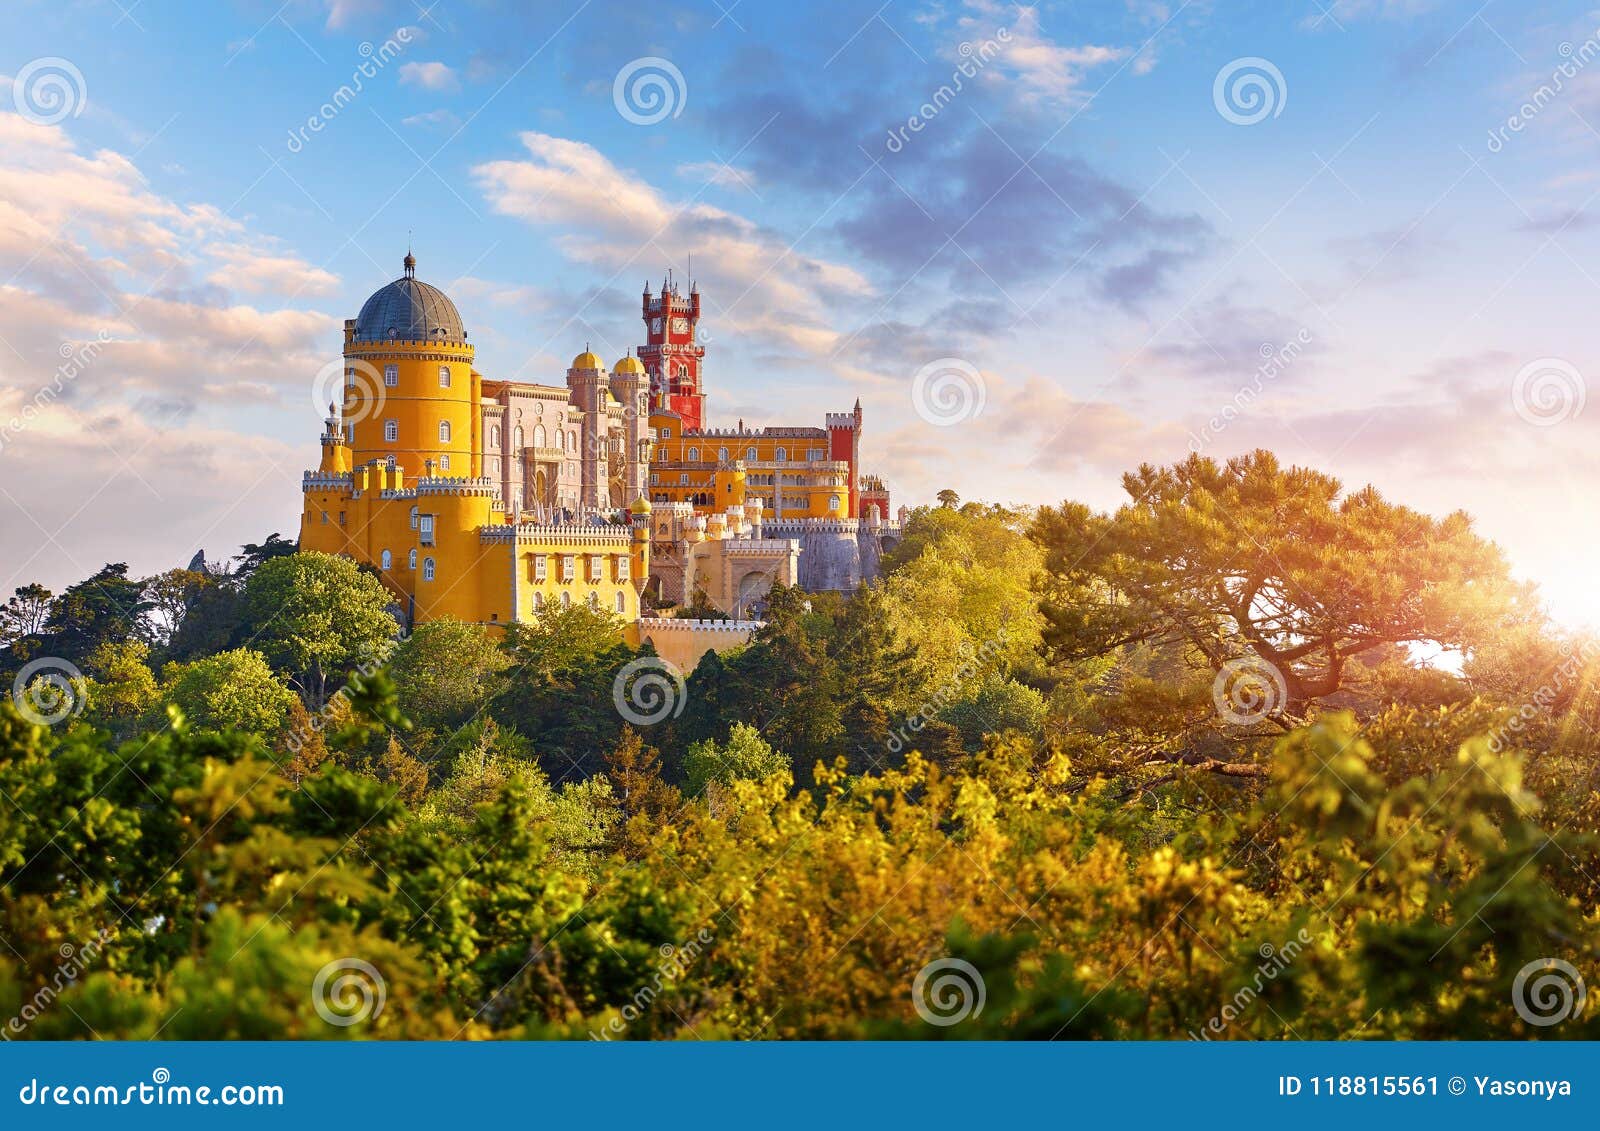 national palace of pena in sintra portugal